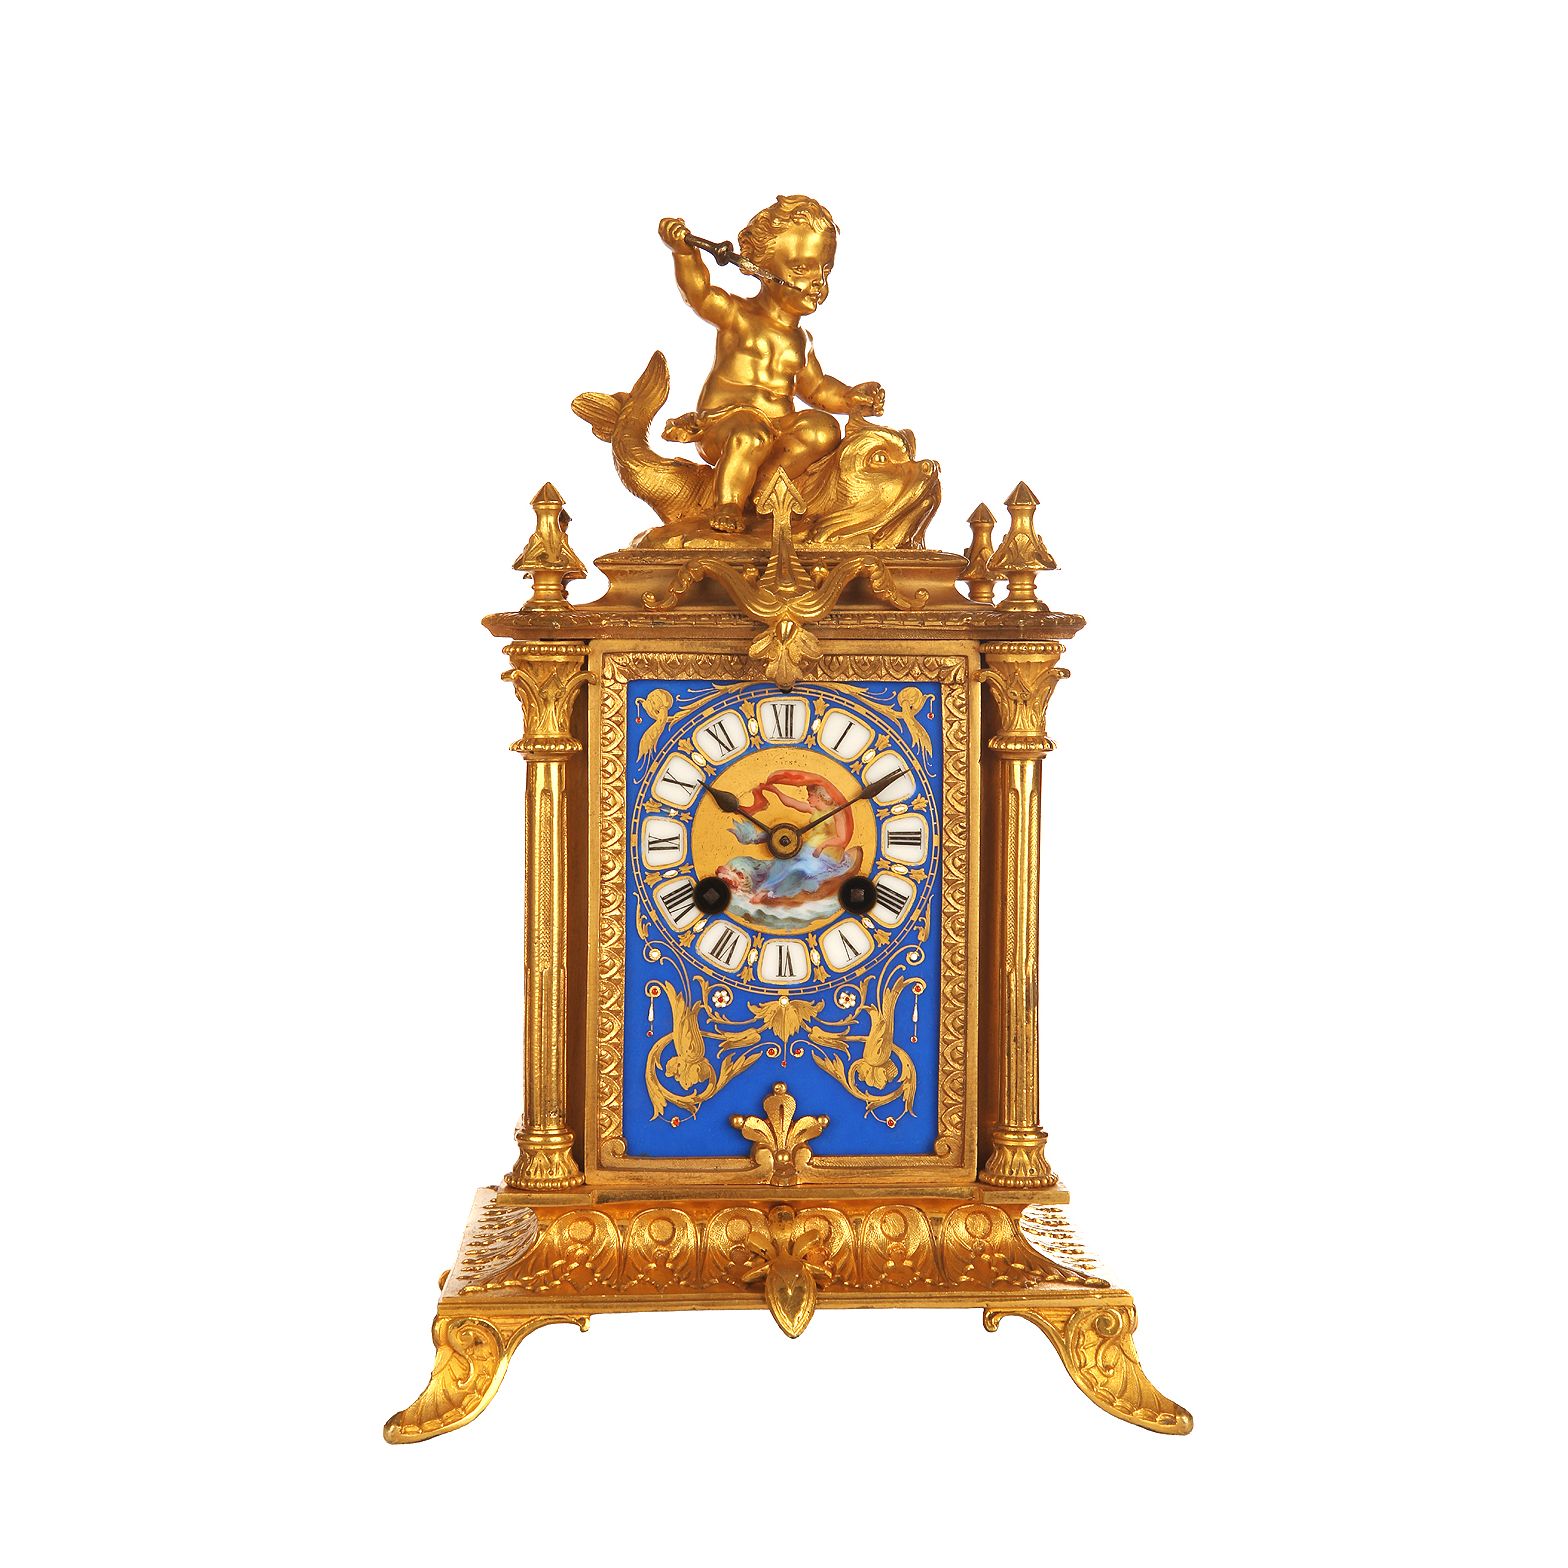 Porcelain Gilt French Ormolu Antique Mantel Clock The ormolu clock tells the story of two competing hotels in austria, one owned by herr stroh and the other by frau lublonitsch. gilt french ormolu antique mantel clock